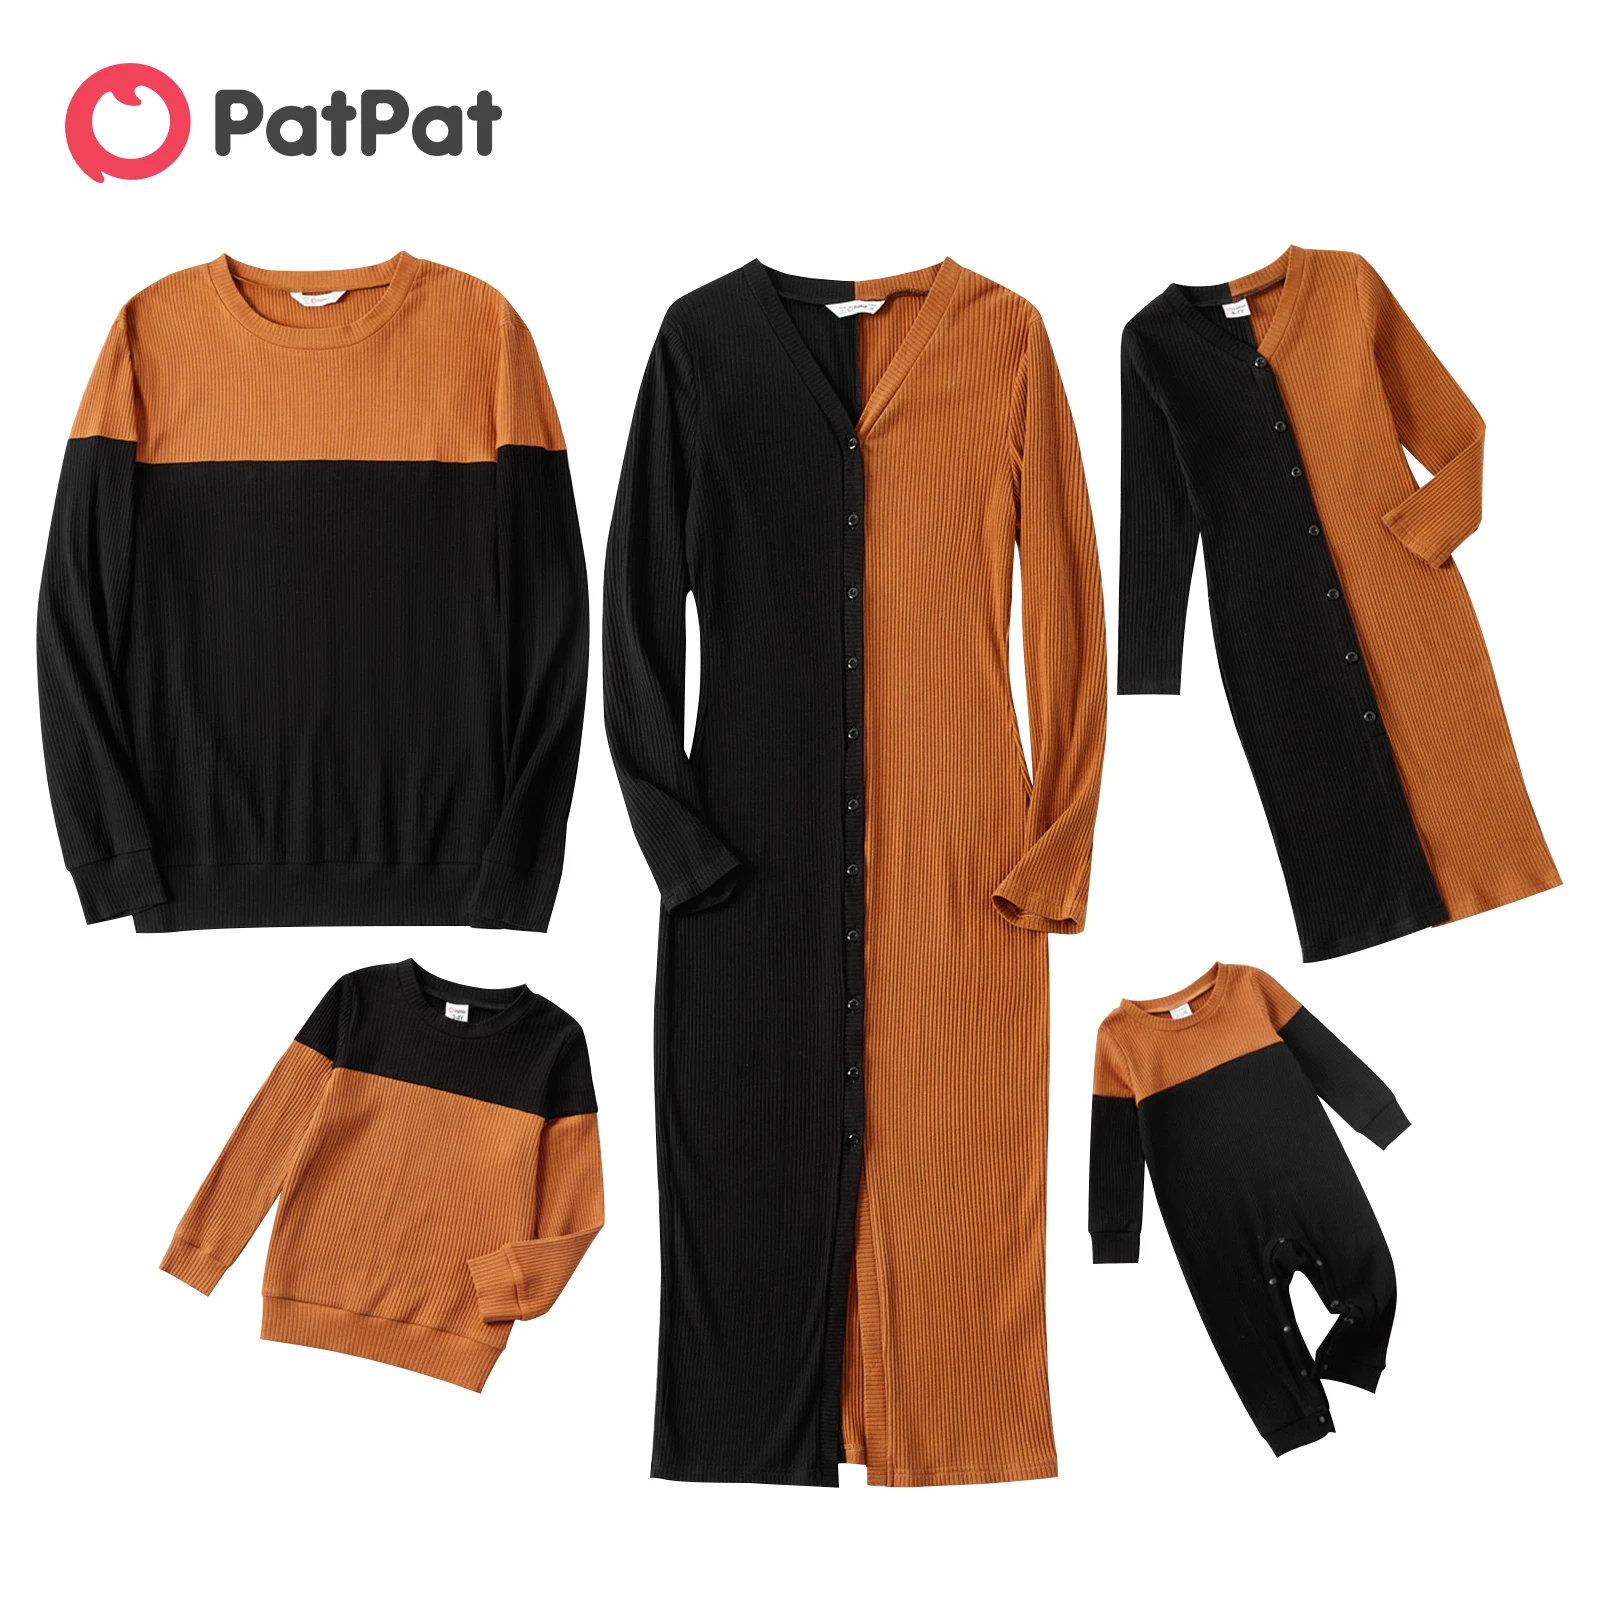 

PatPat Family Matching Outfits Colorblock Rib Knit Long-sleeve Button Front Split Bodycon Dresses and Tops Family Costume Sets